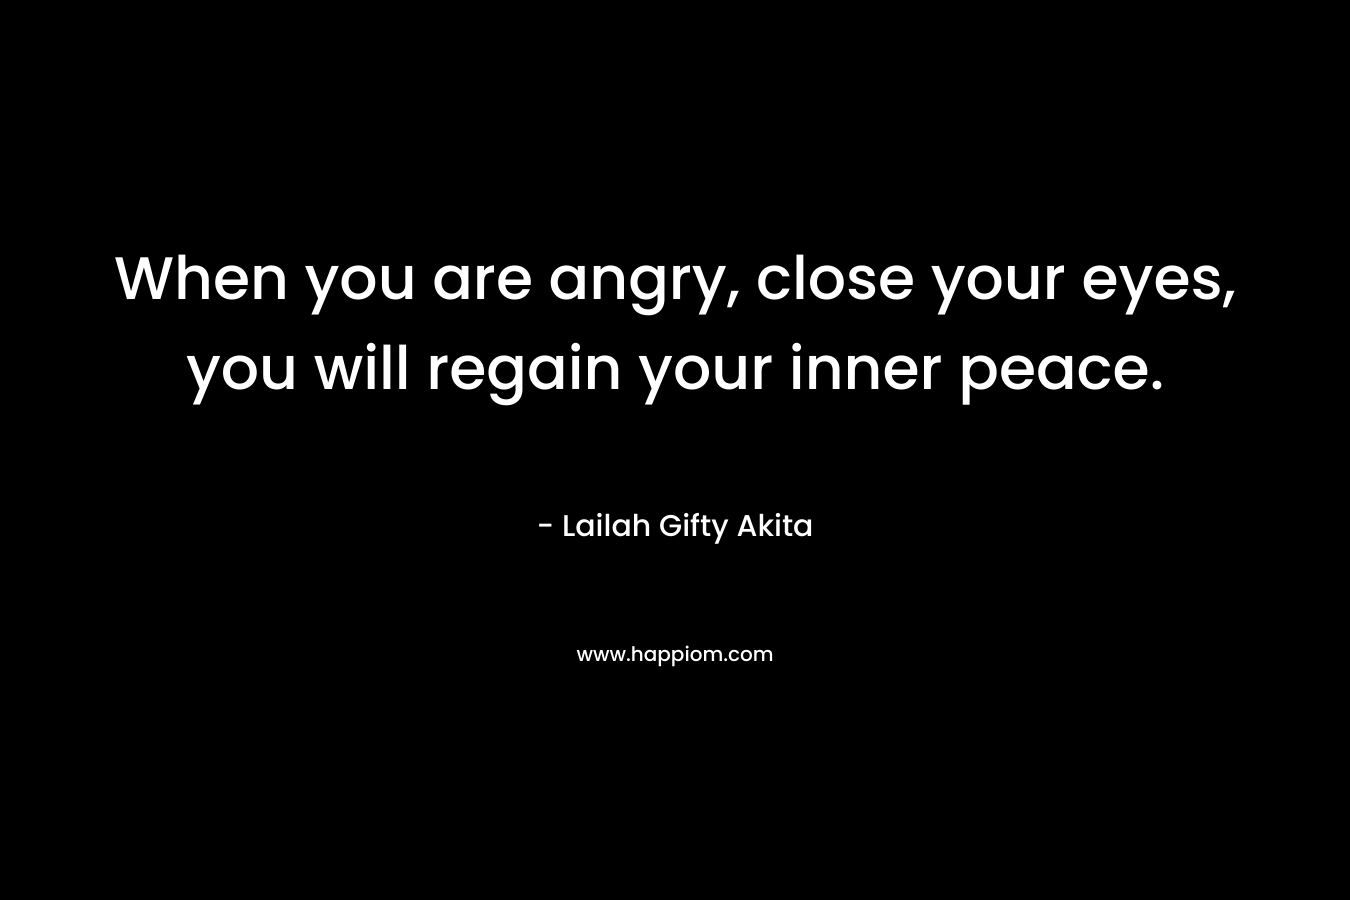 When you are angry, close your eyes, you will regain your inner peace. – Lailah Gifty Akita